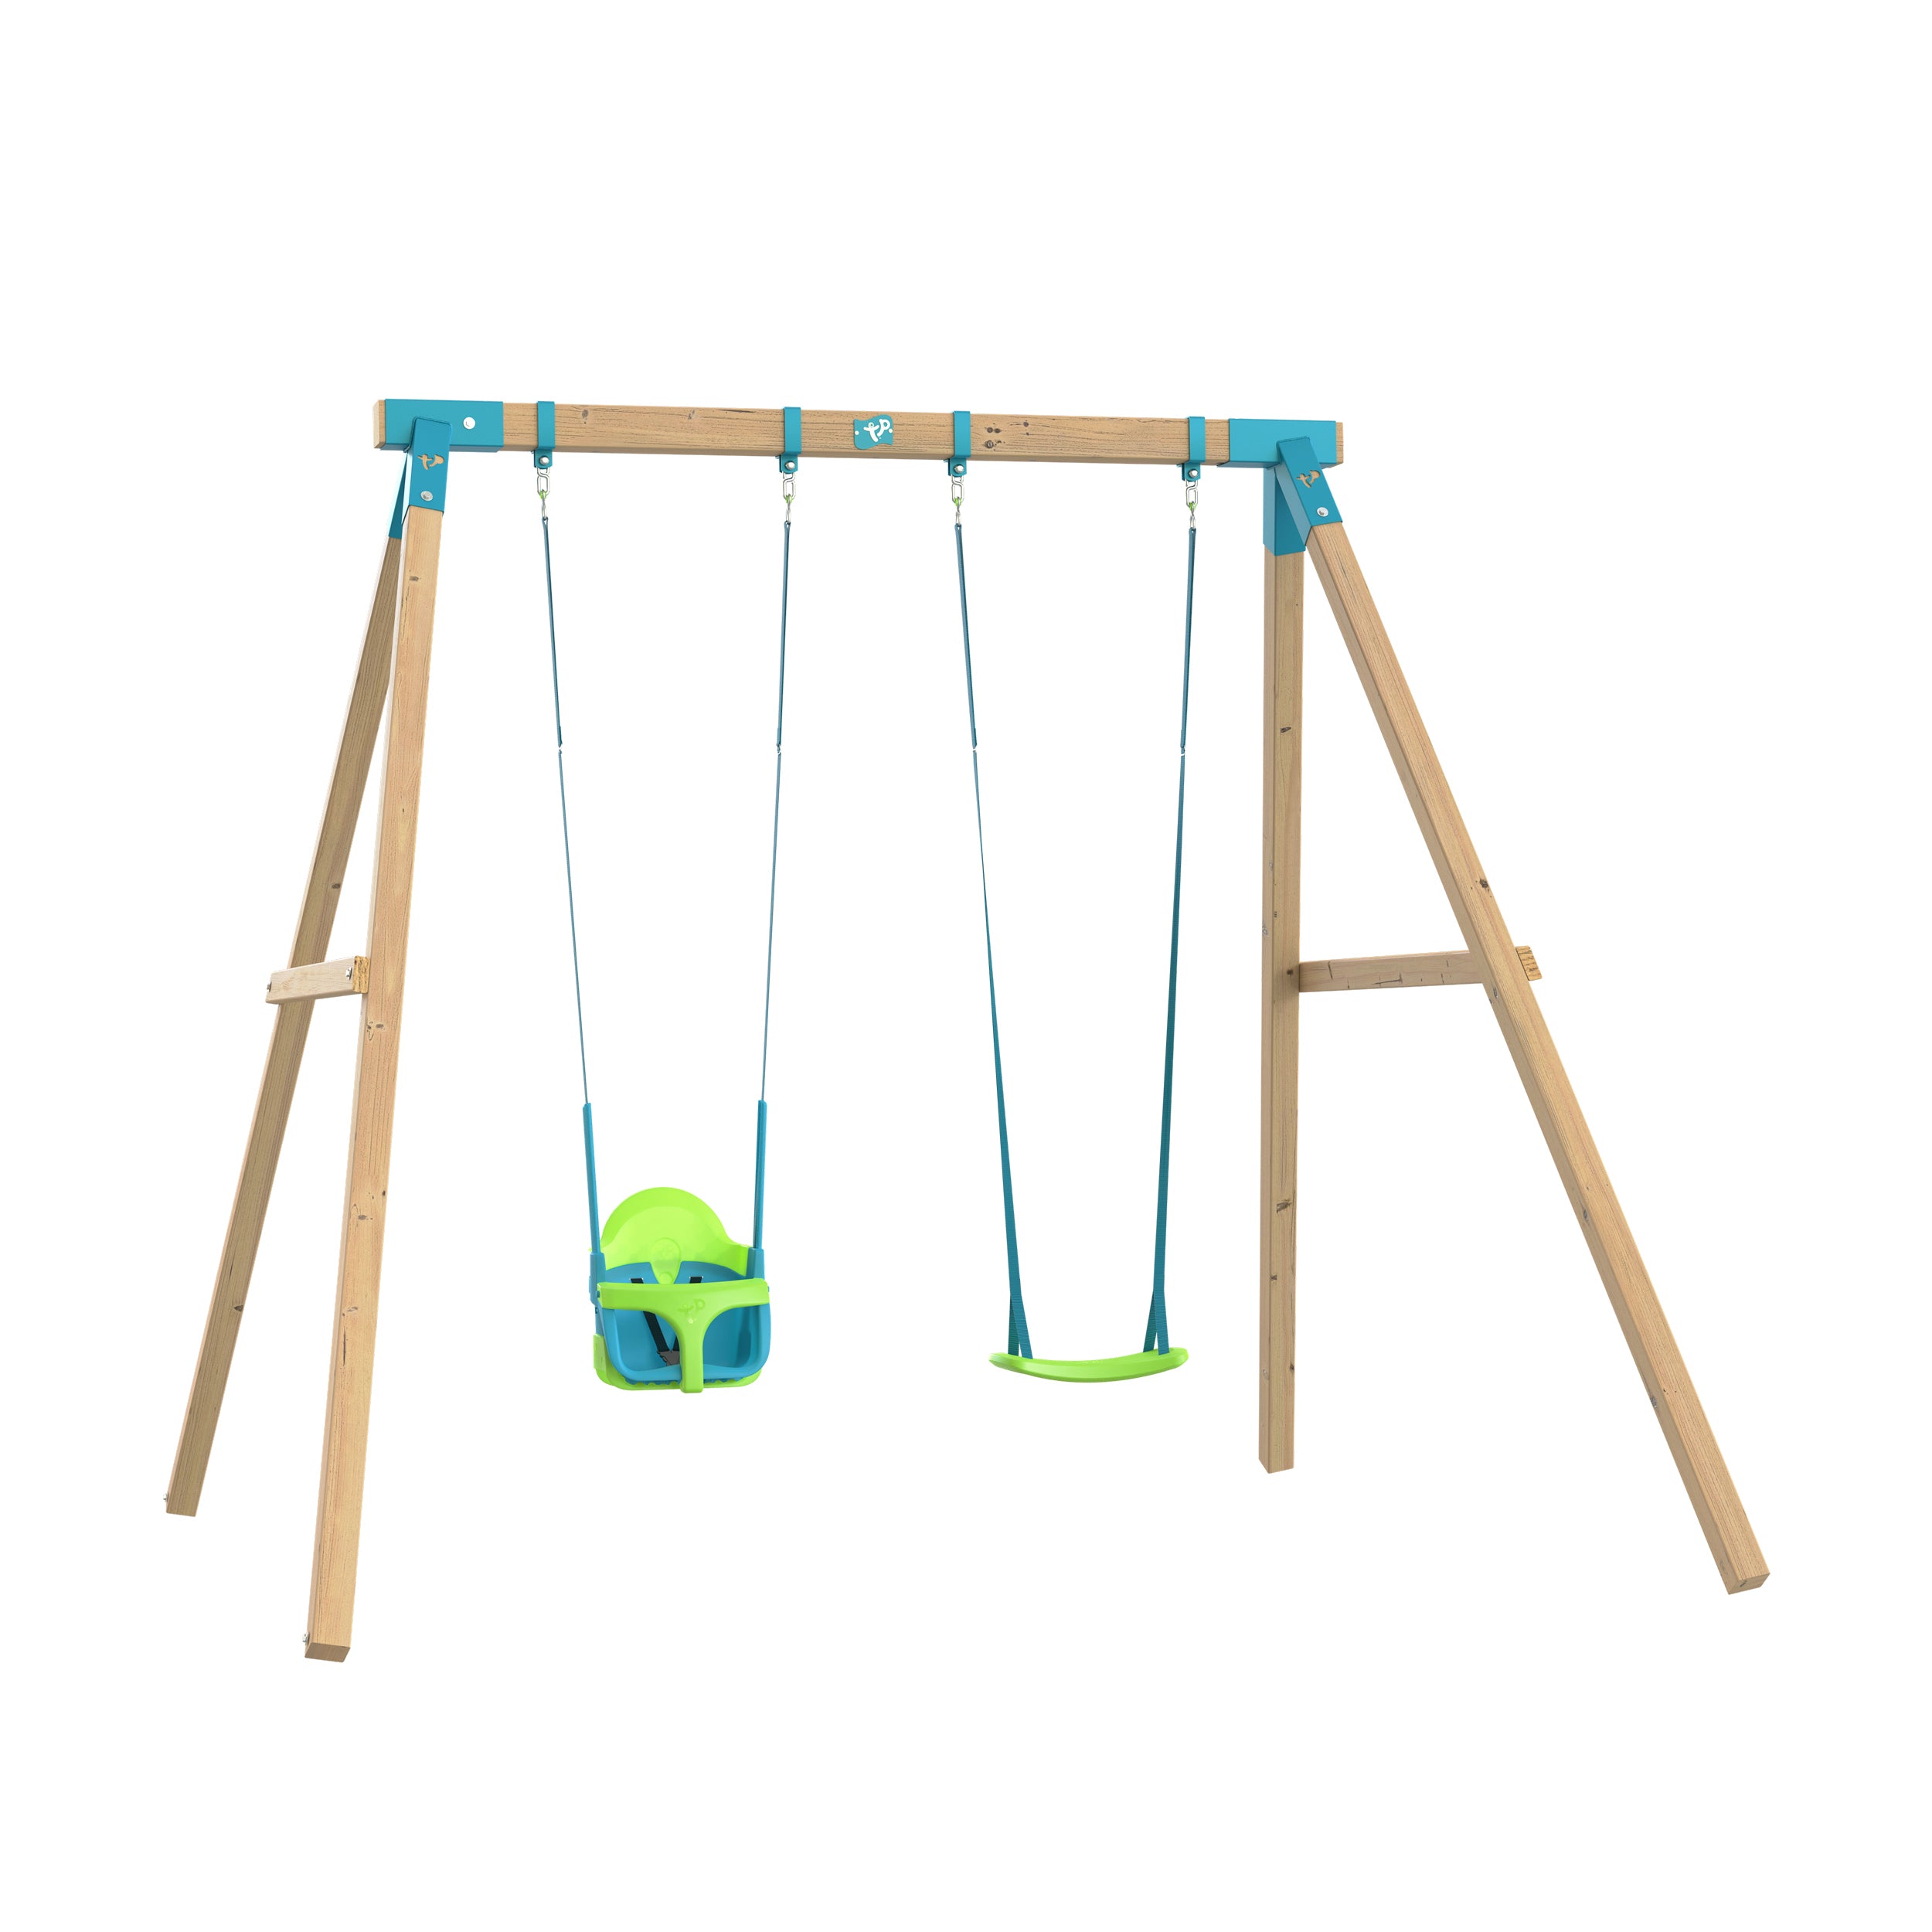 TP Kingswood Double Swing Squarewood Set with Quadpod - FSC<sup>®</sup> certified